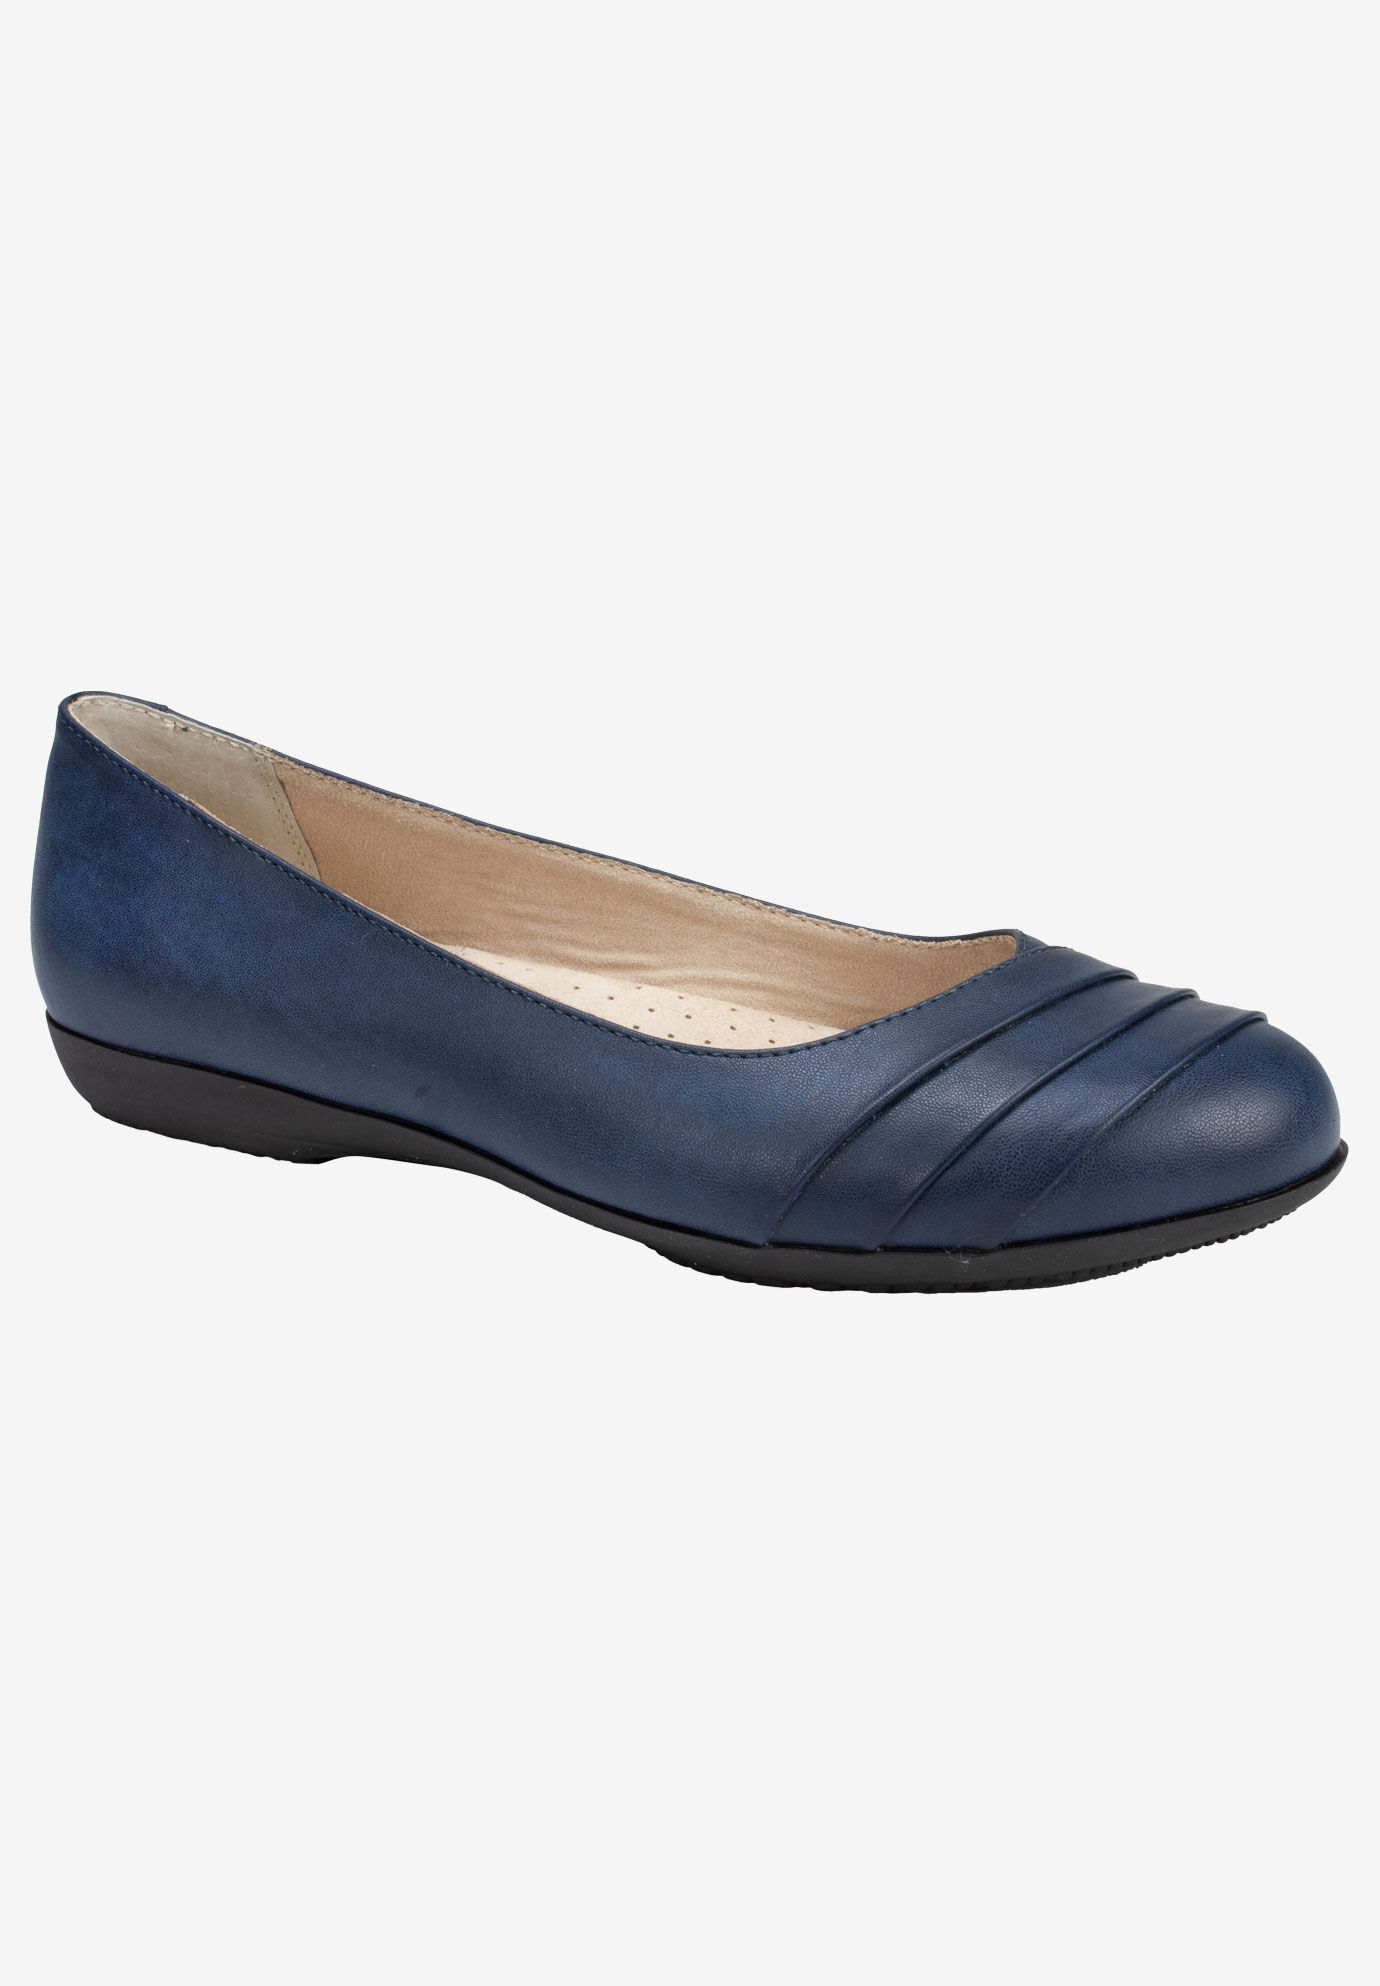 Wide Width Women's Clara Flat by Cliffs in Navy Burnished Smooth (Size 8 1/2 W)